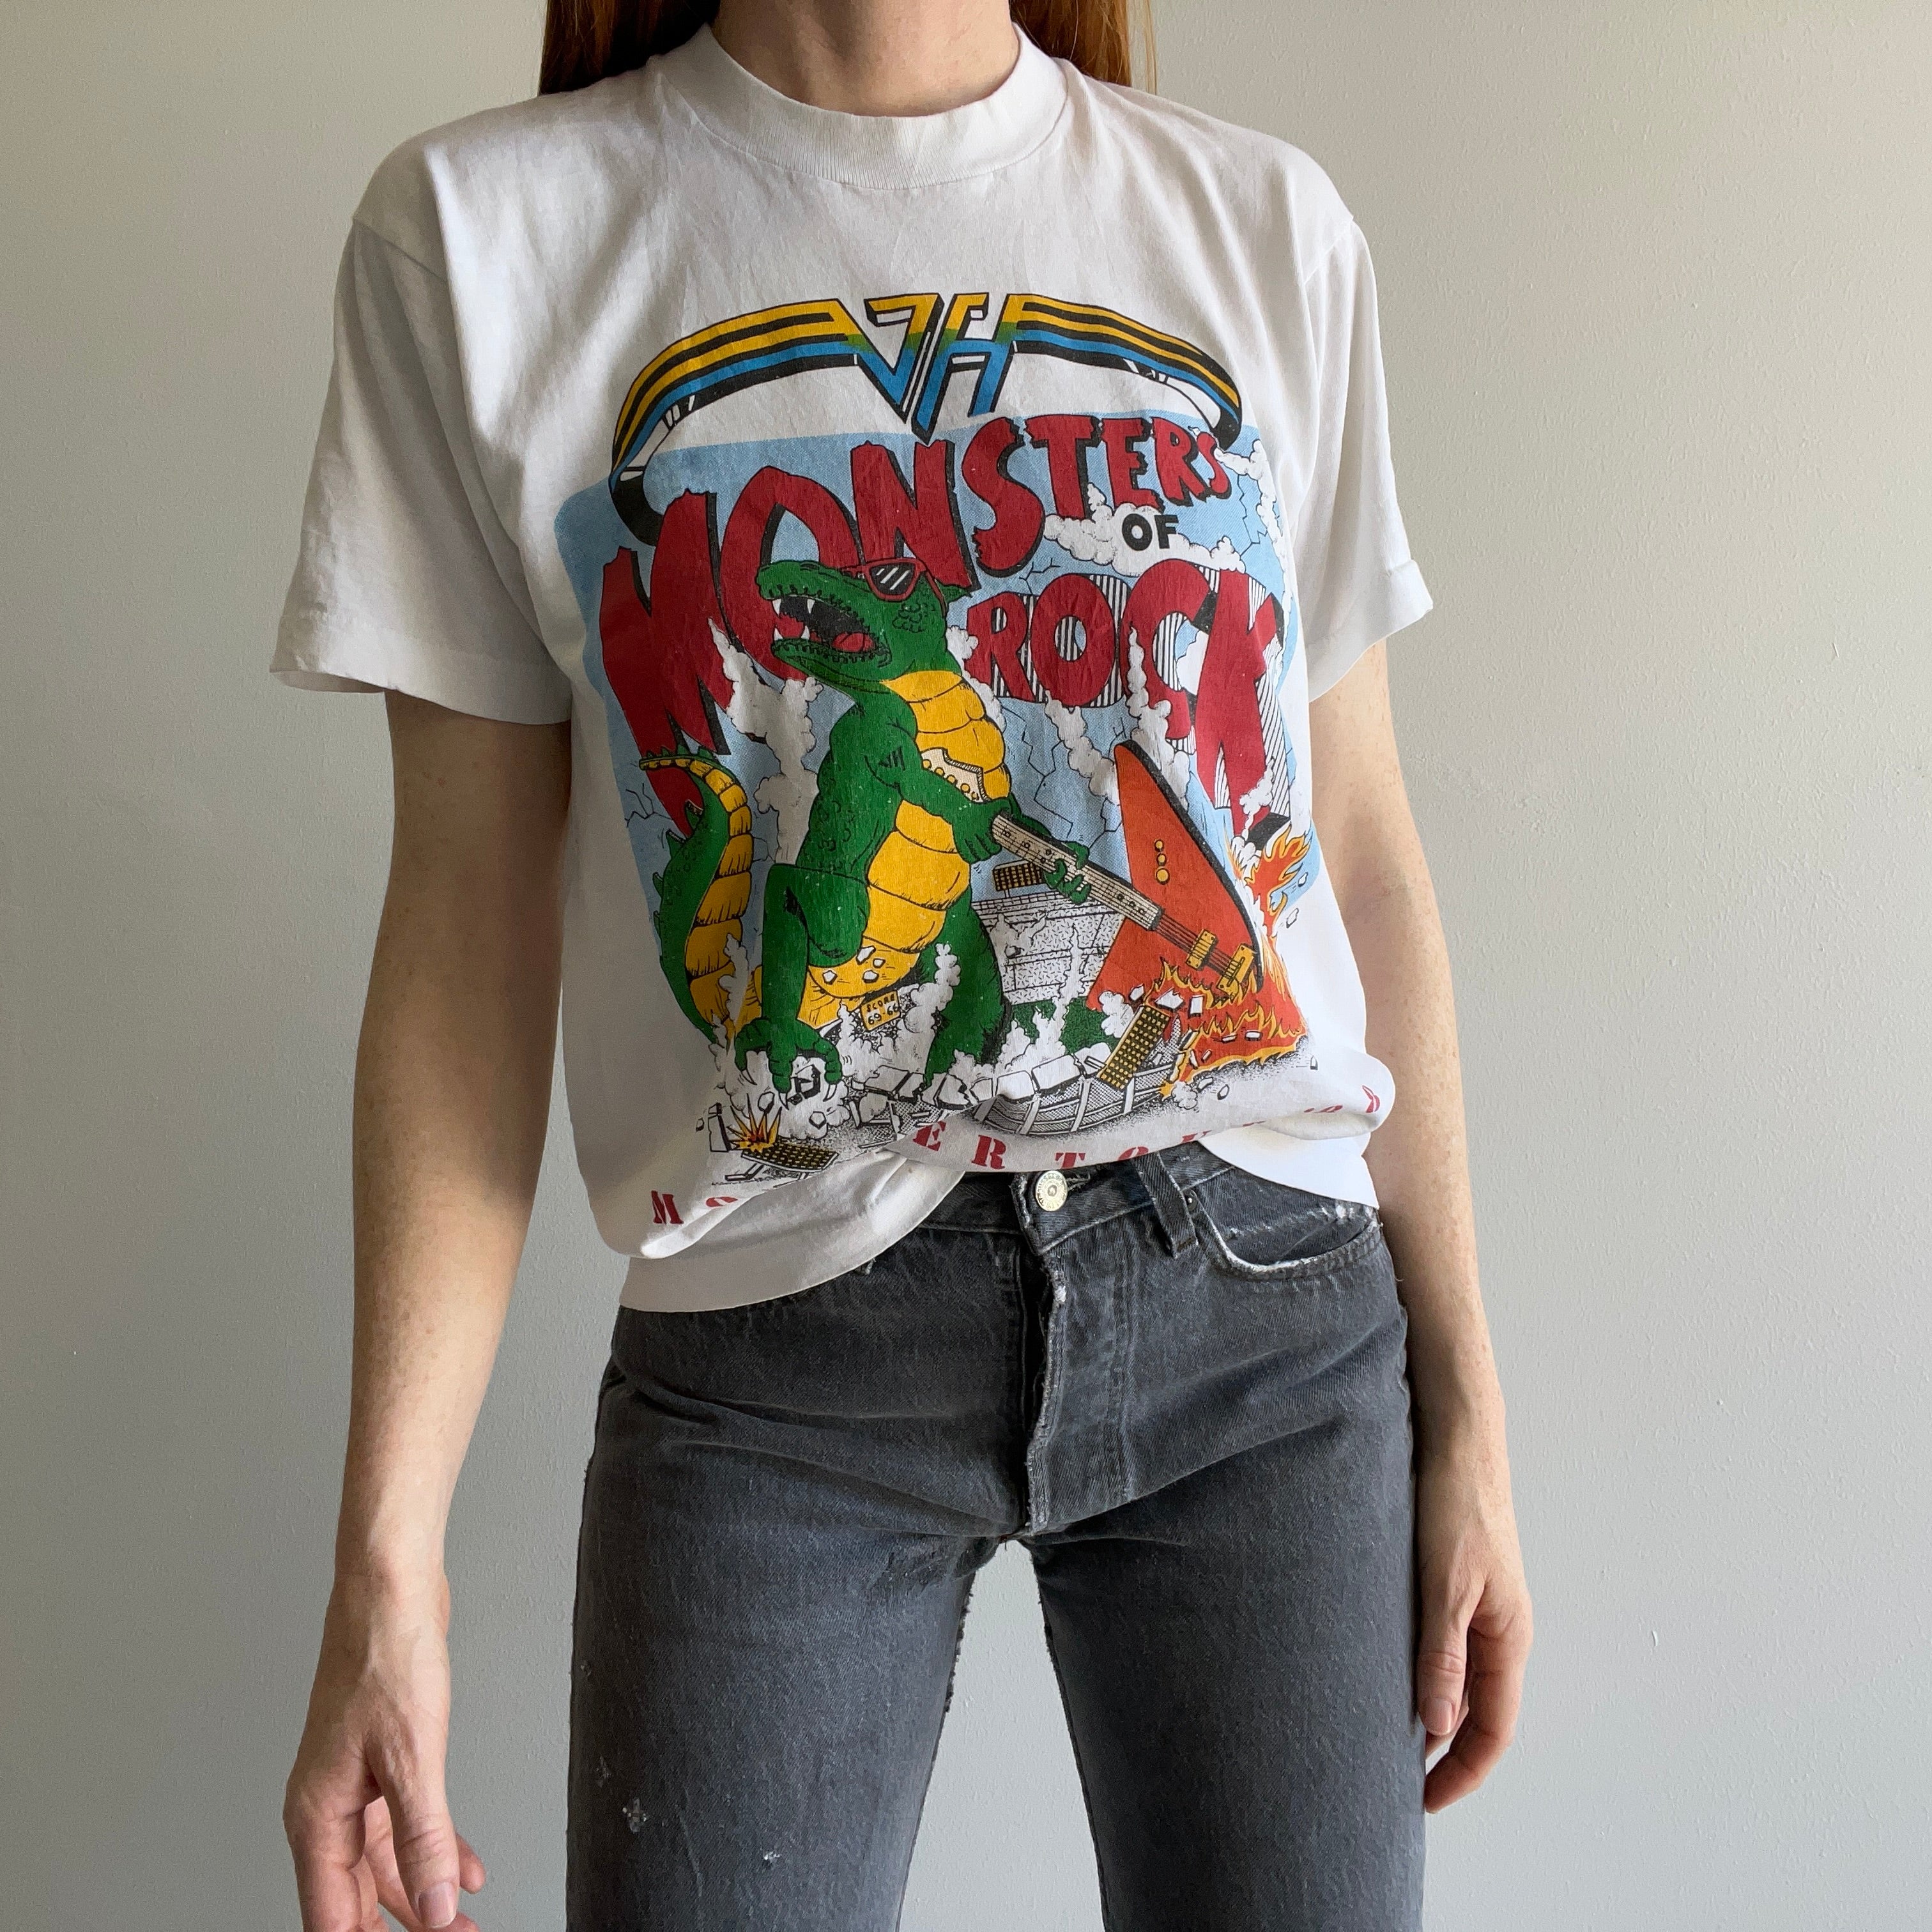 How to Score the Best Vintage Rock Shirts